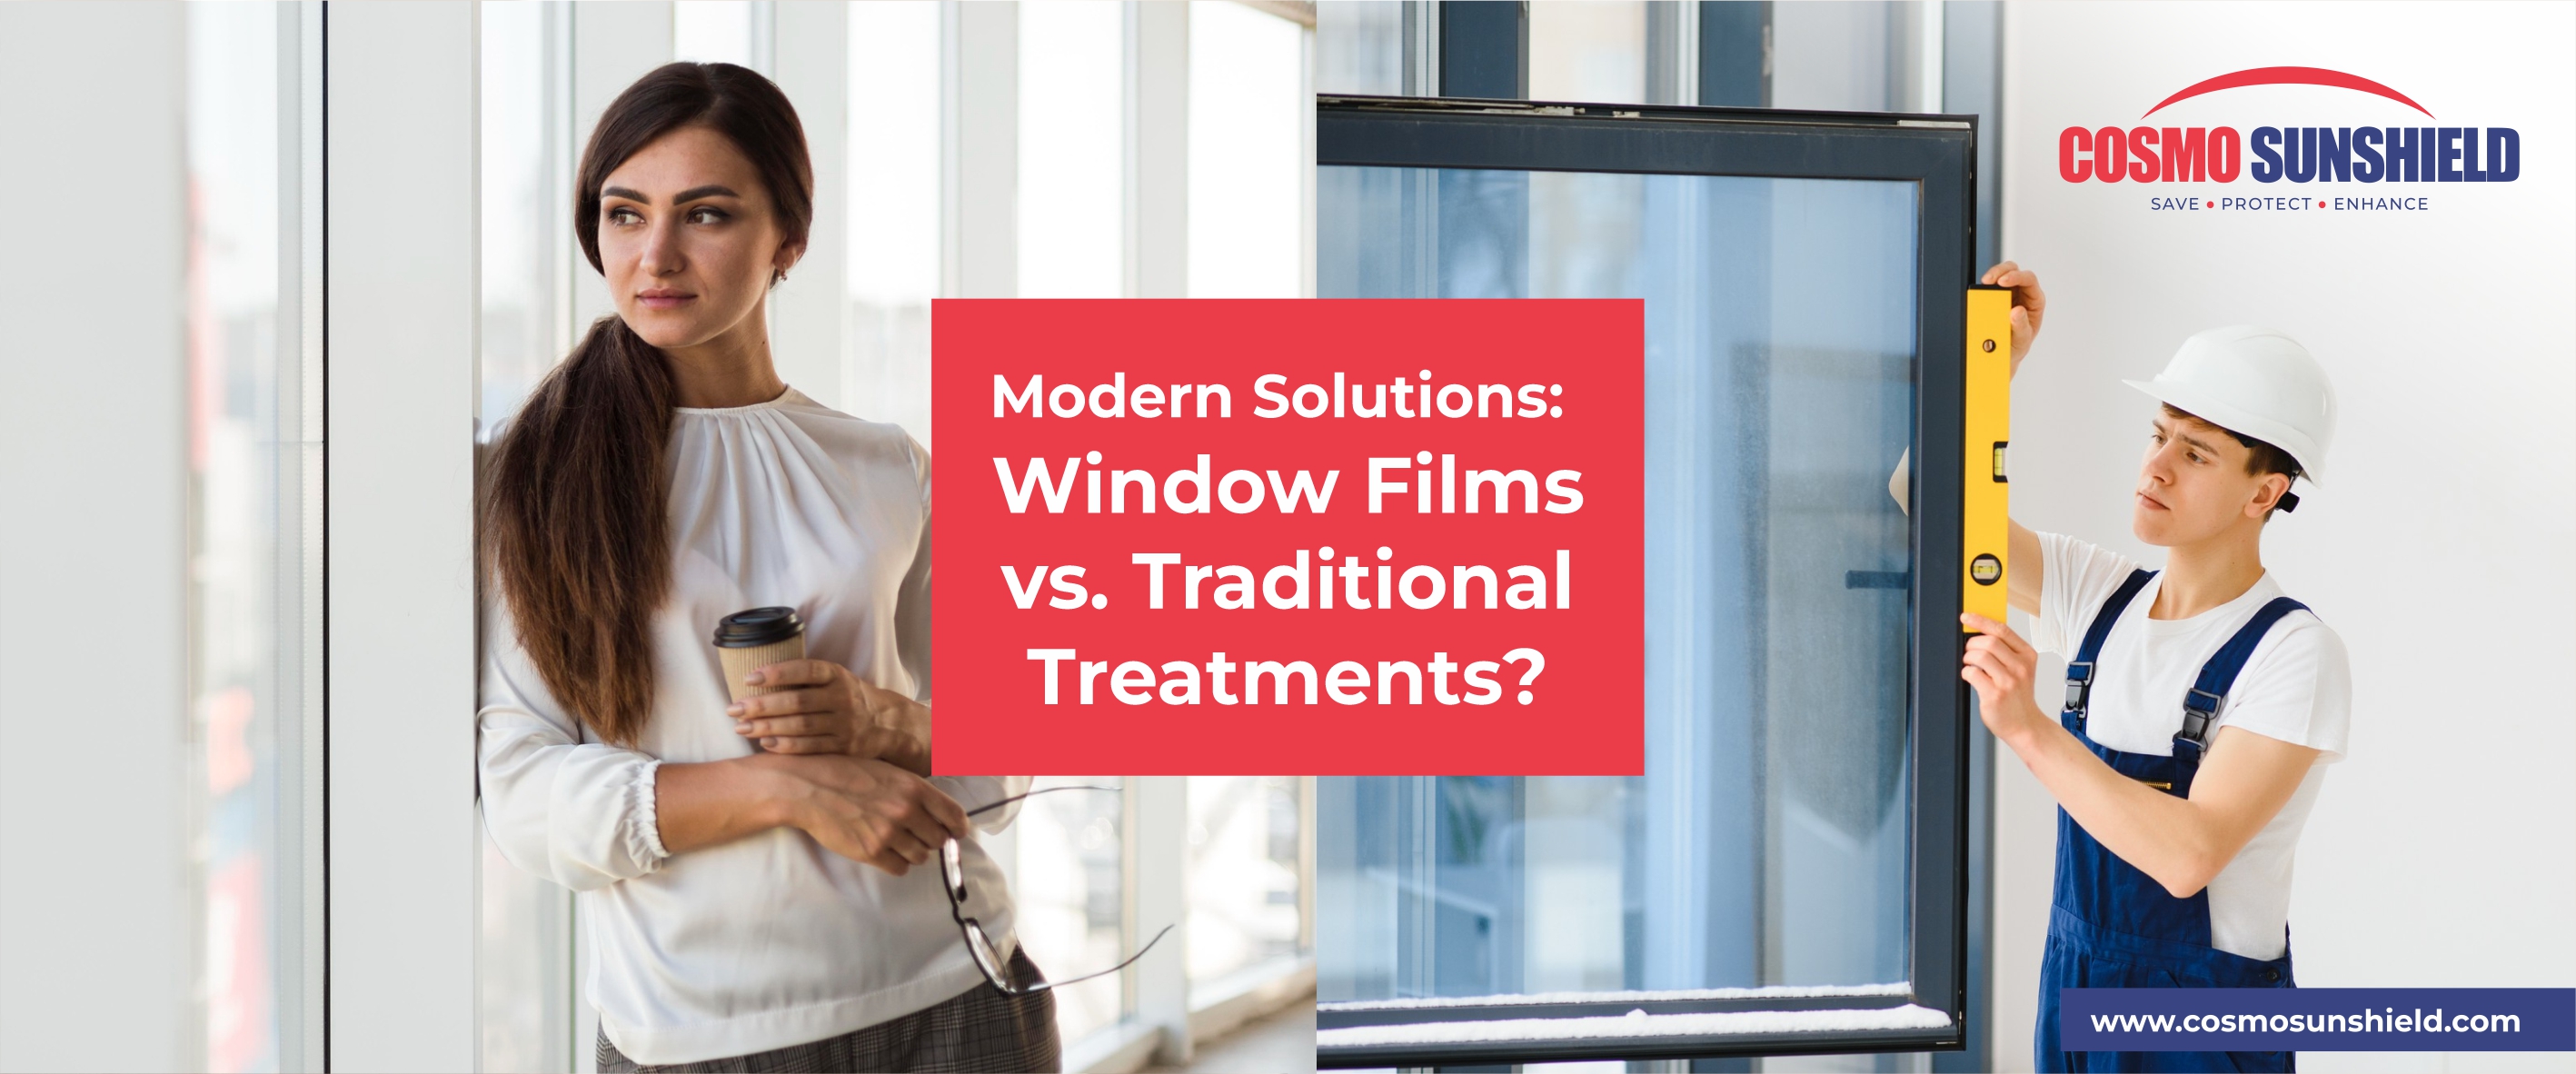 Modern Solutions: Window Films vs. Traditional Treatments